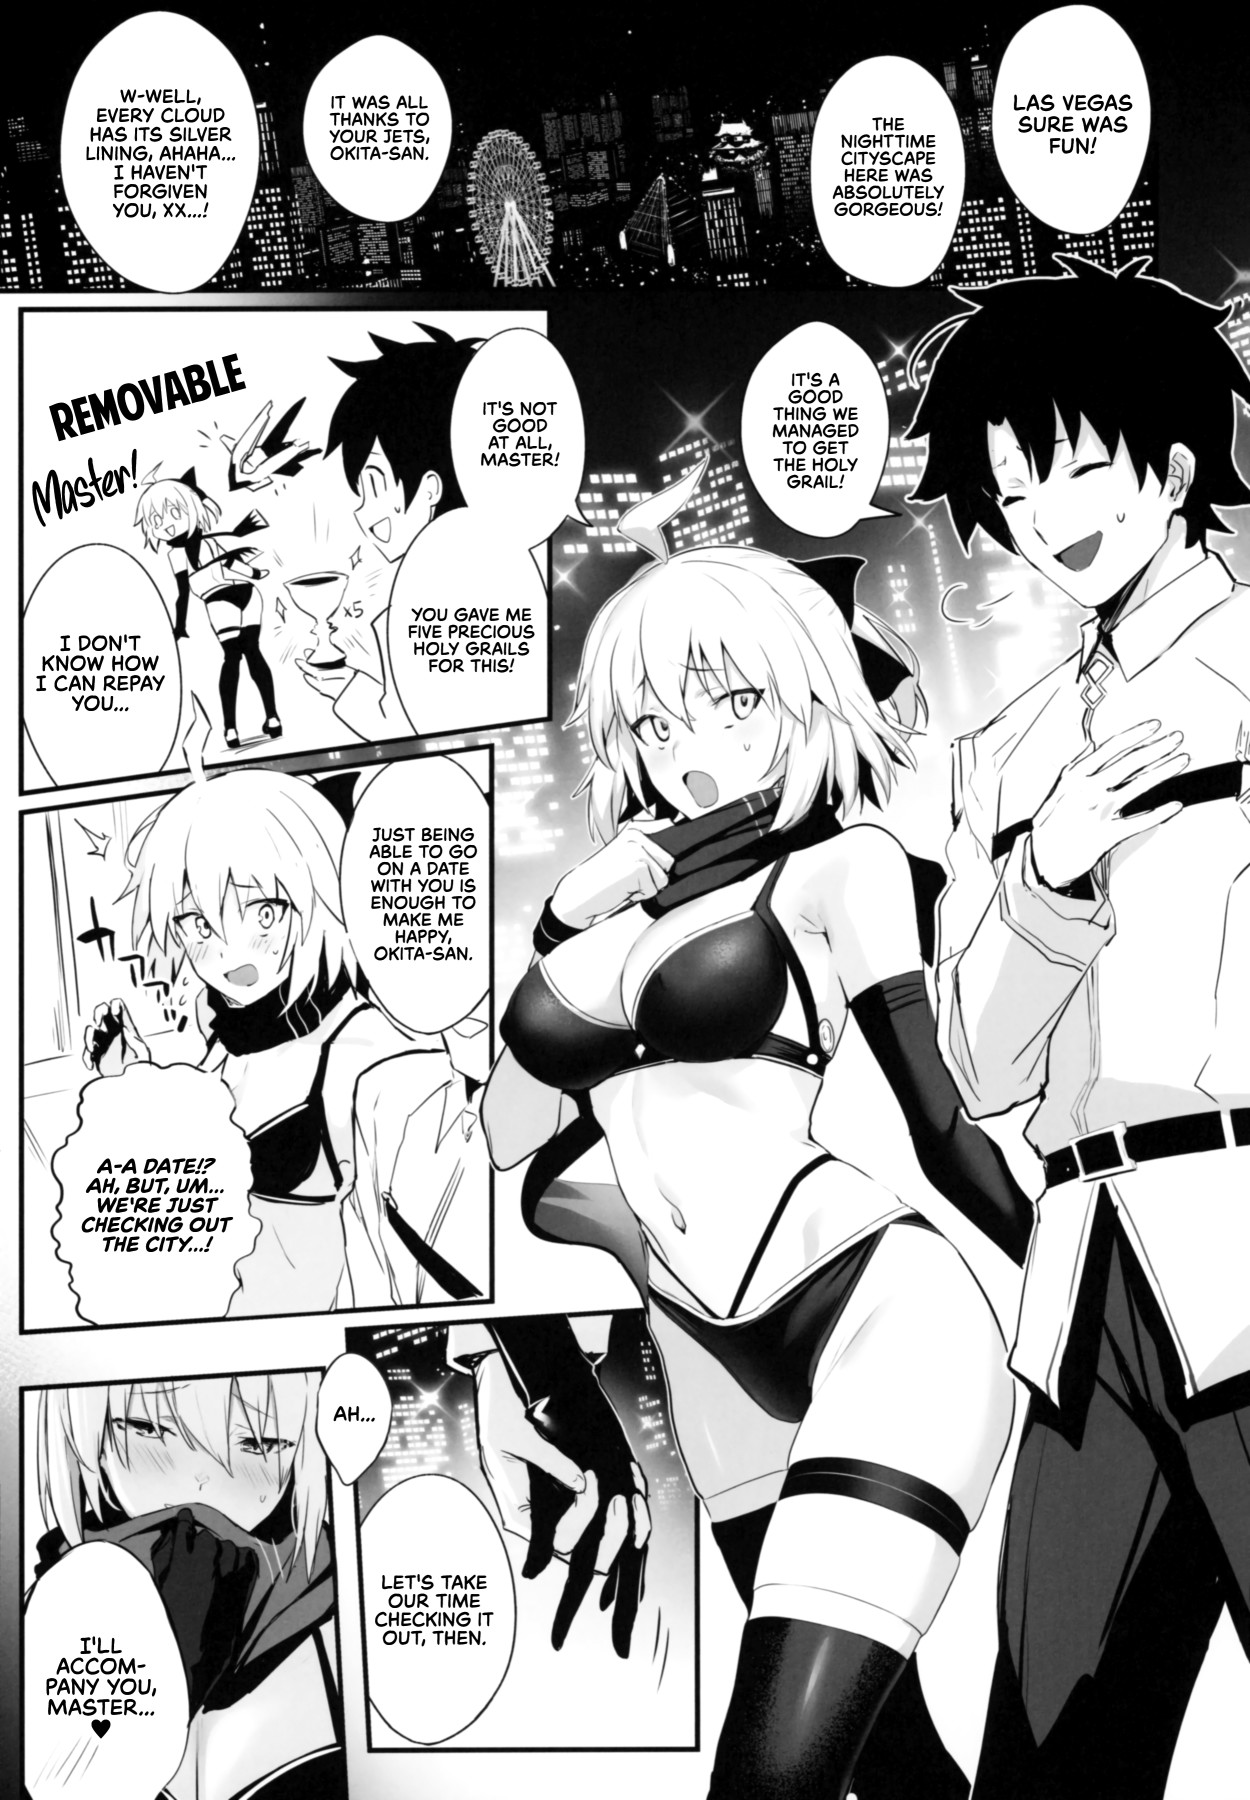 Hentai Manga Comic-Swimsuit Sex with Okita-san at a Love Hotel Until Morning-Read-2